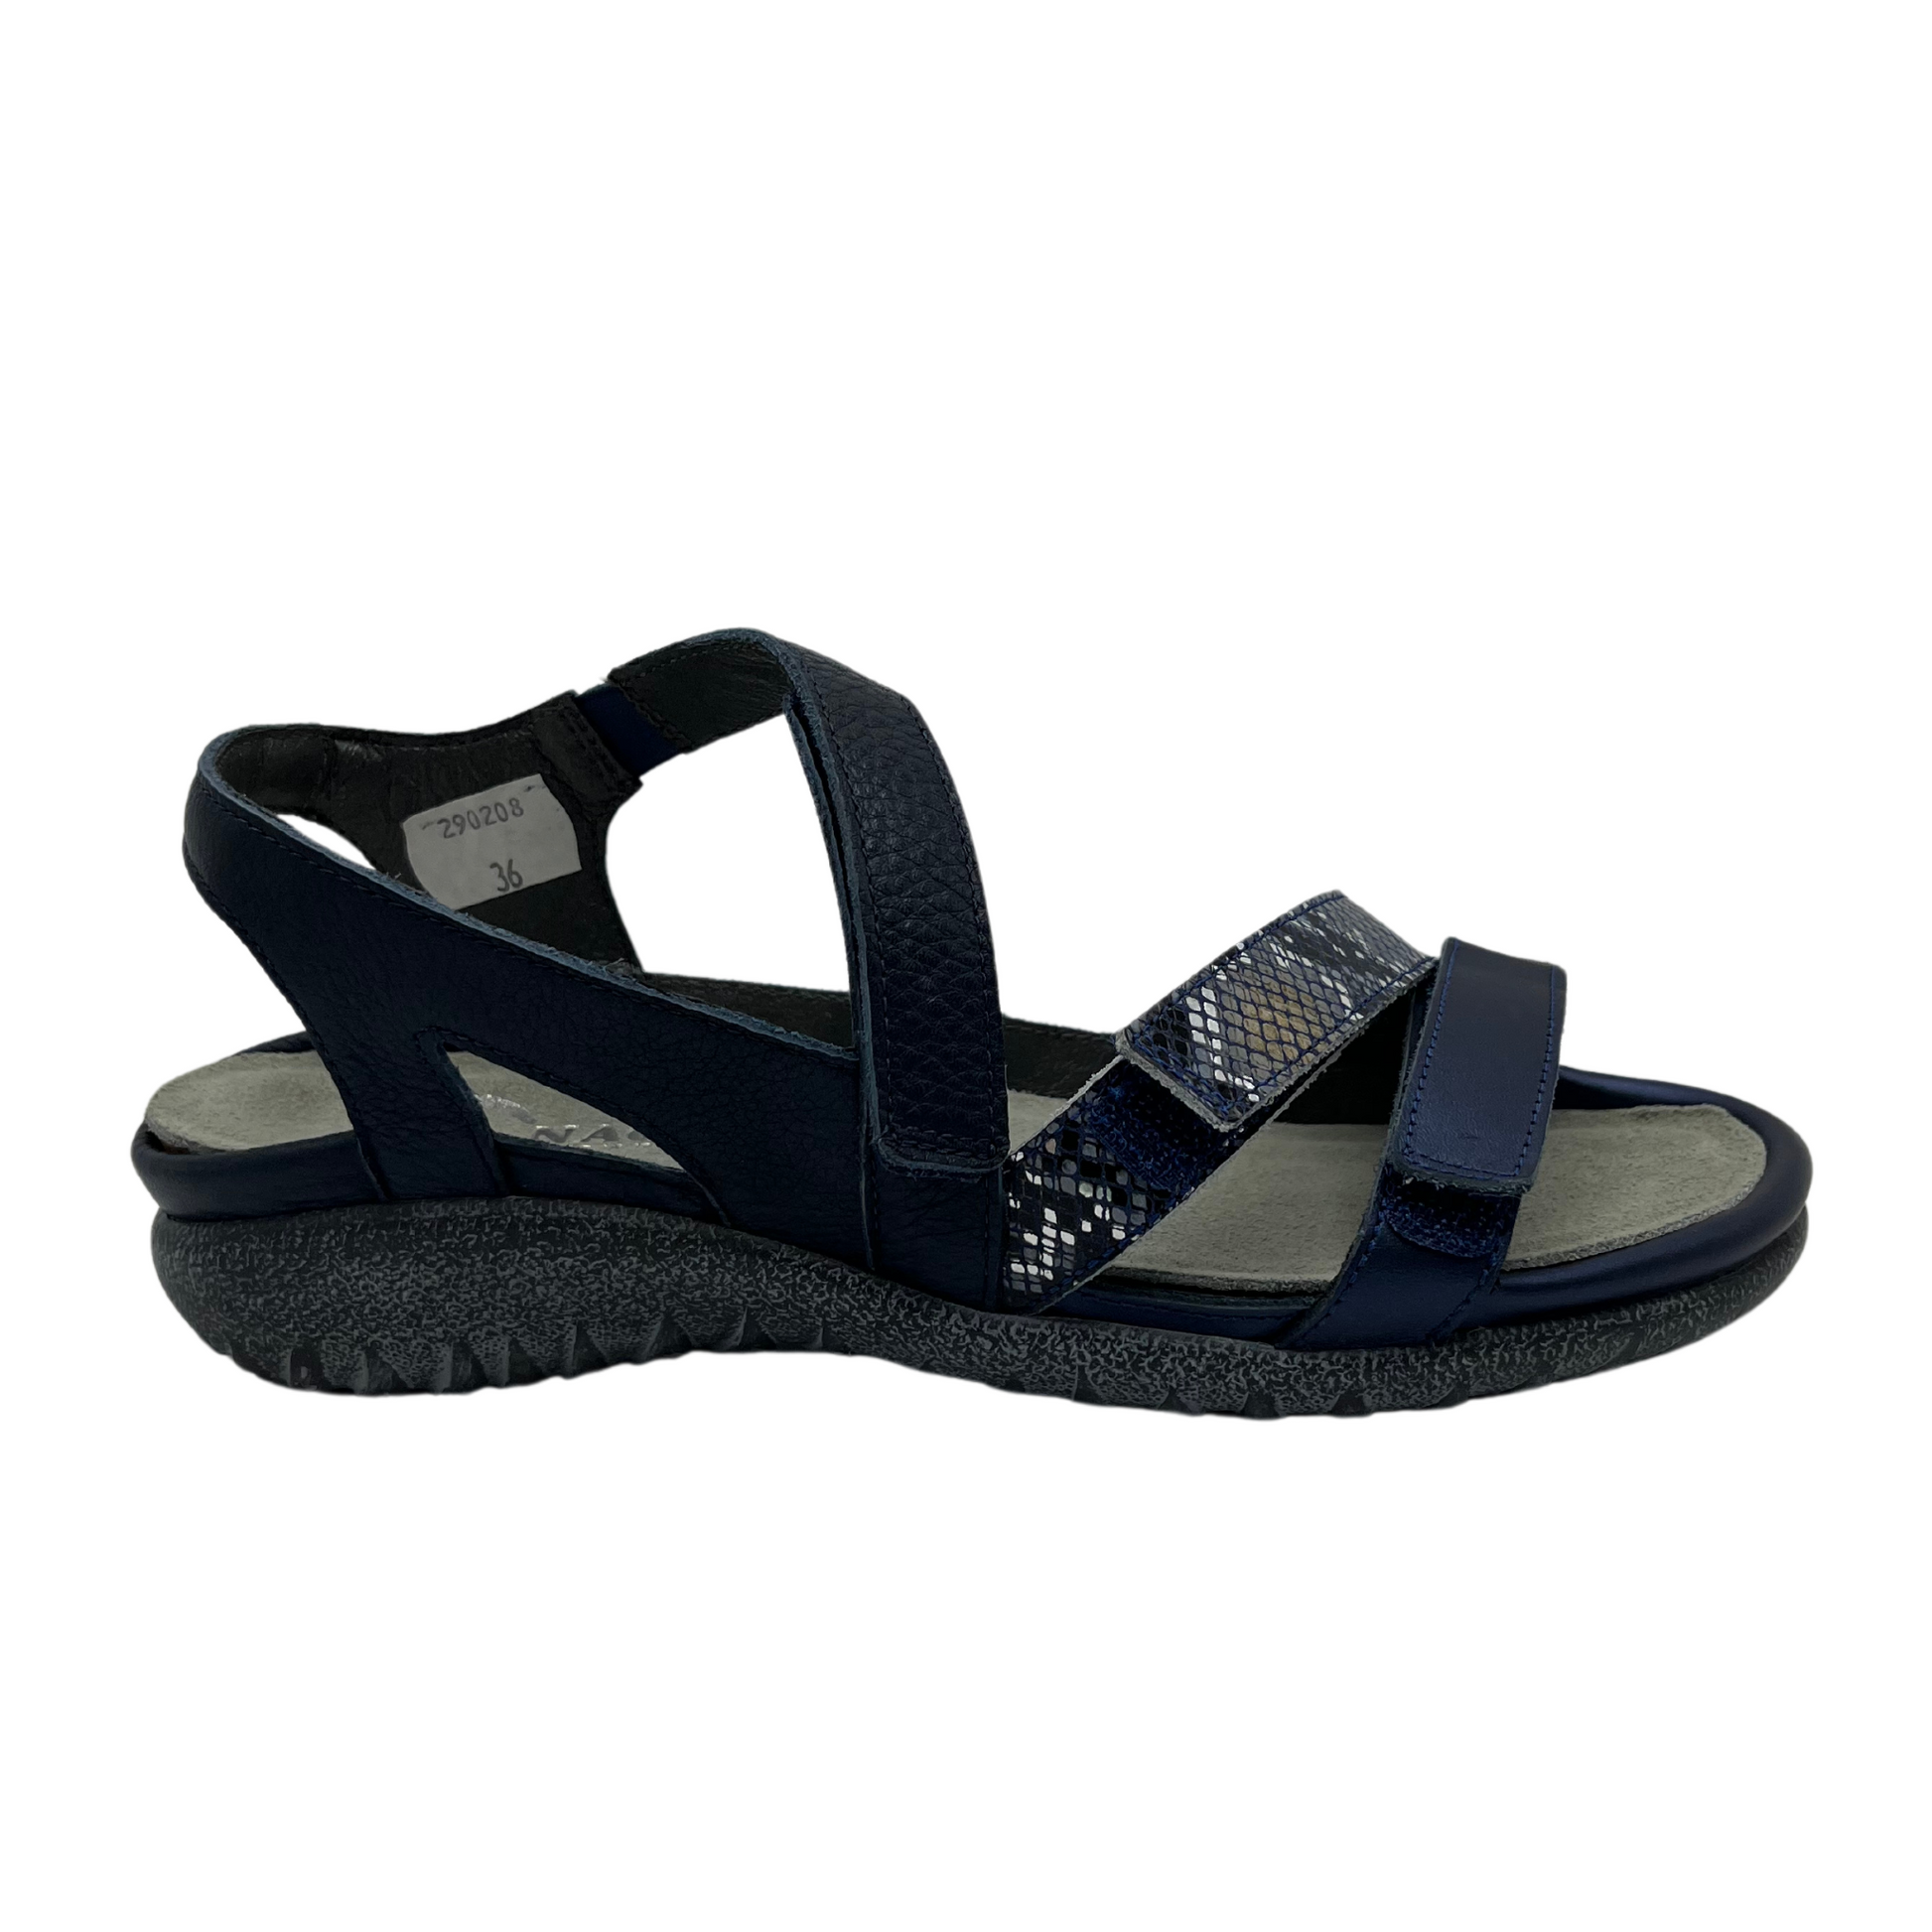 Right facing view of navy leather sandal with 3 velcro straps, wedge sole and metallic detail